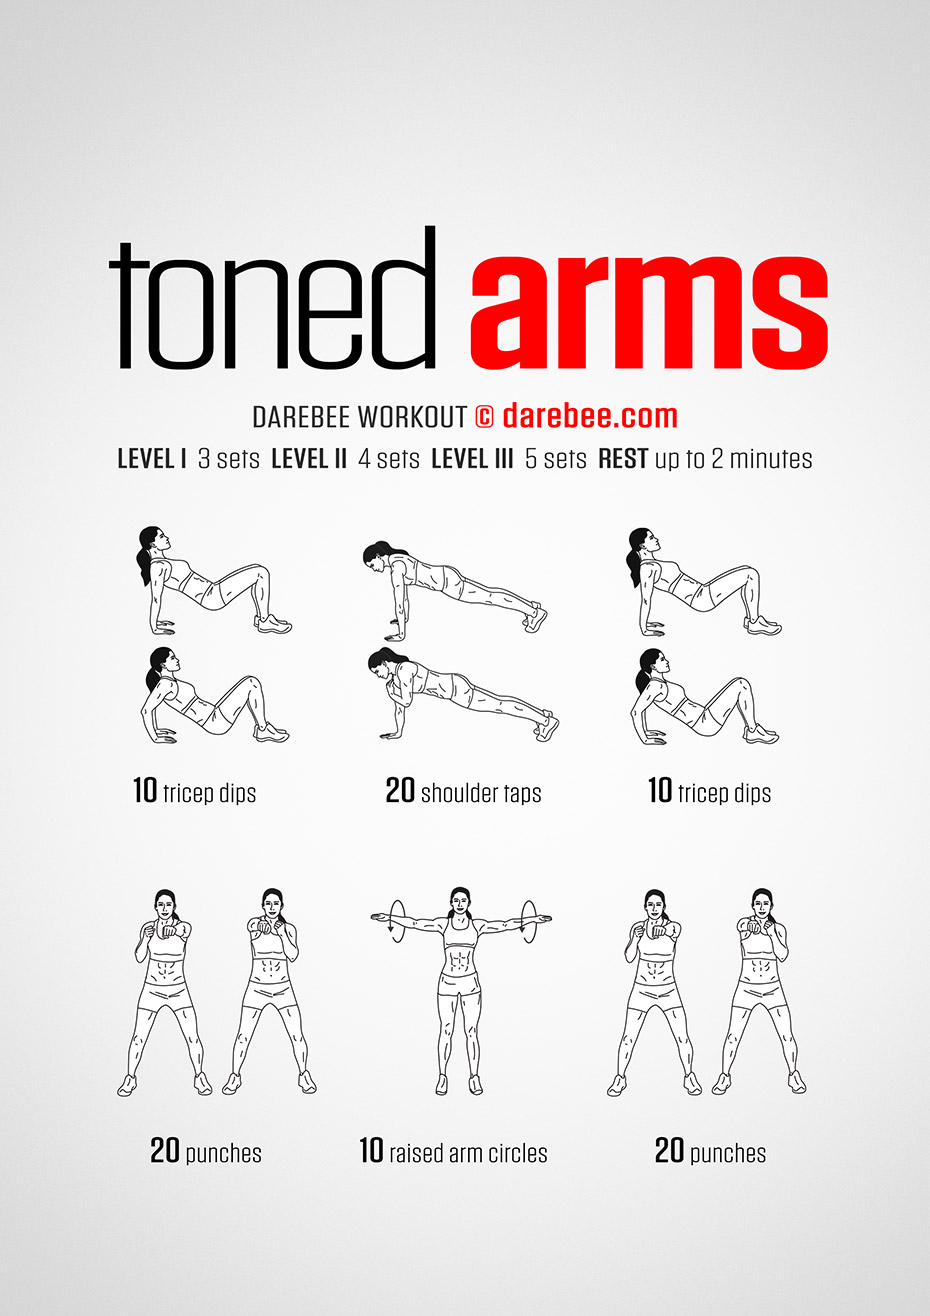 5 Super Easy & Effective Arm Toning Workouts To Get Strong and Toned Arms